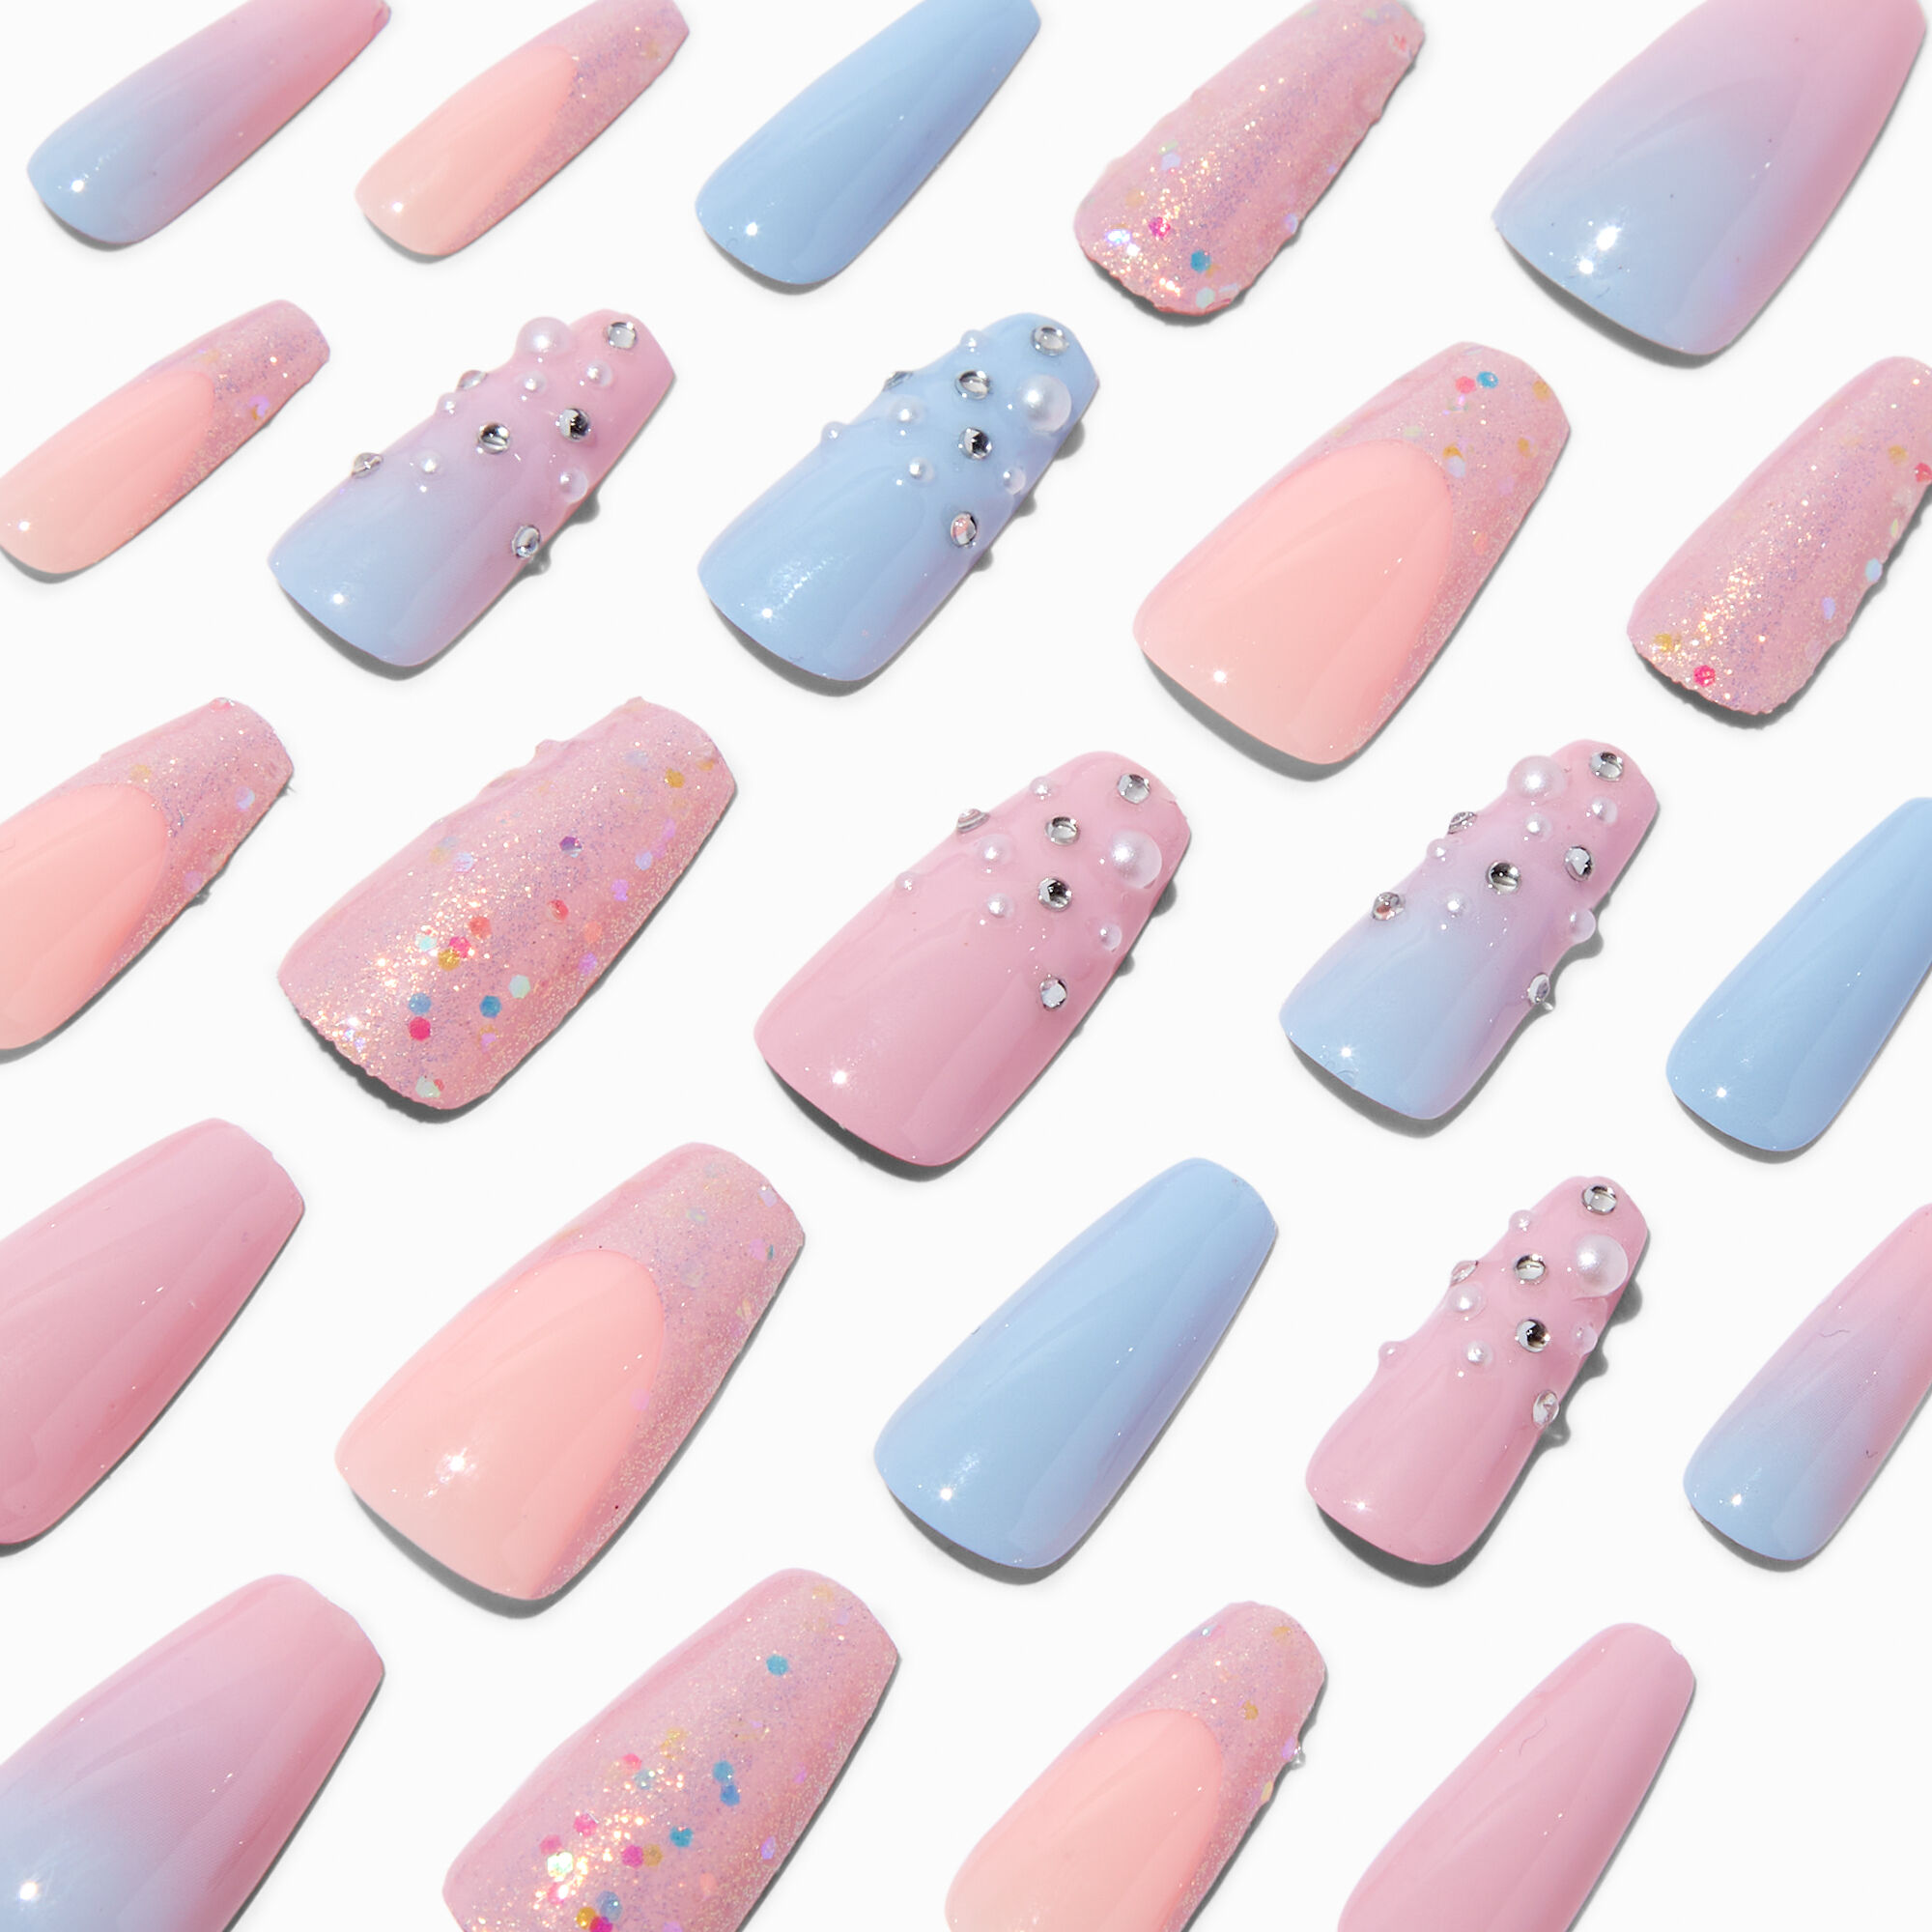 View Claires Pastel Pink Pearl Squareletto Vegan Faux Nail Set 24 Pack Blue information